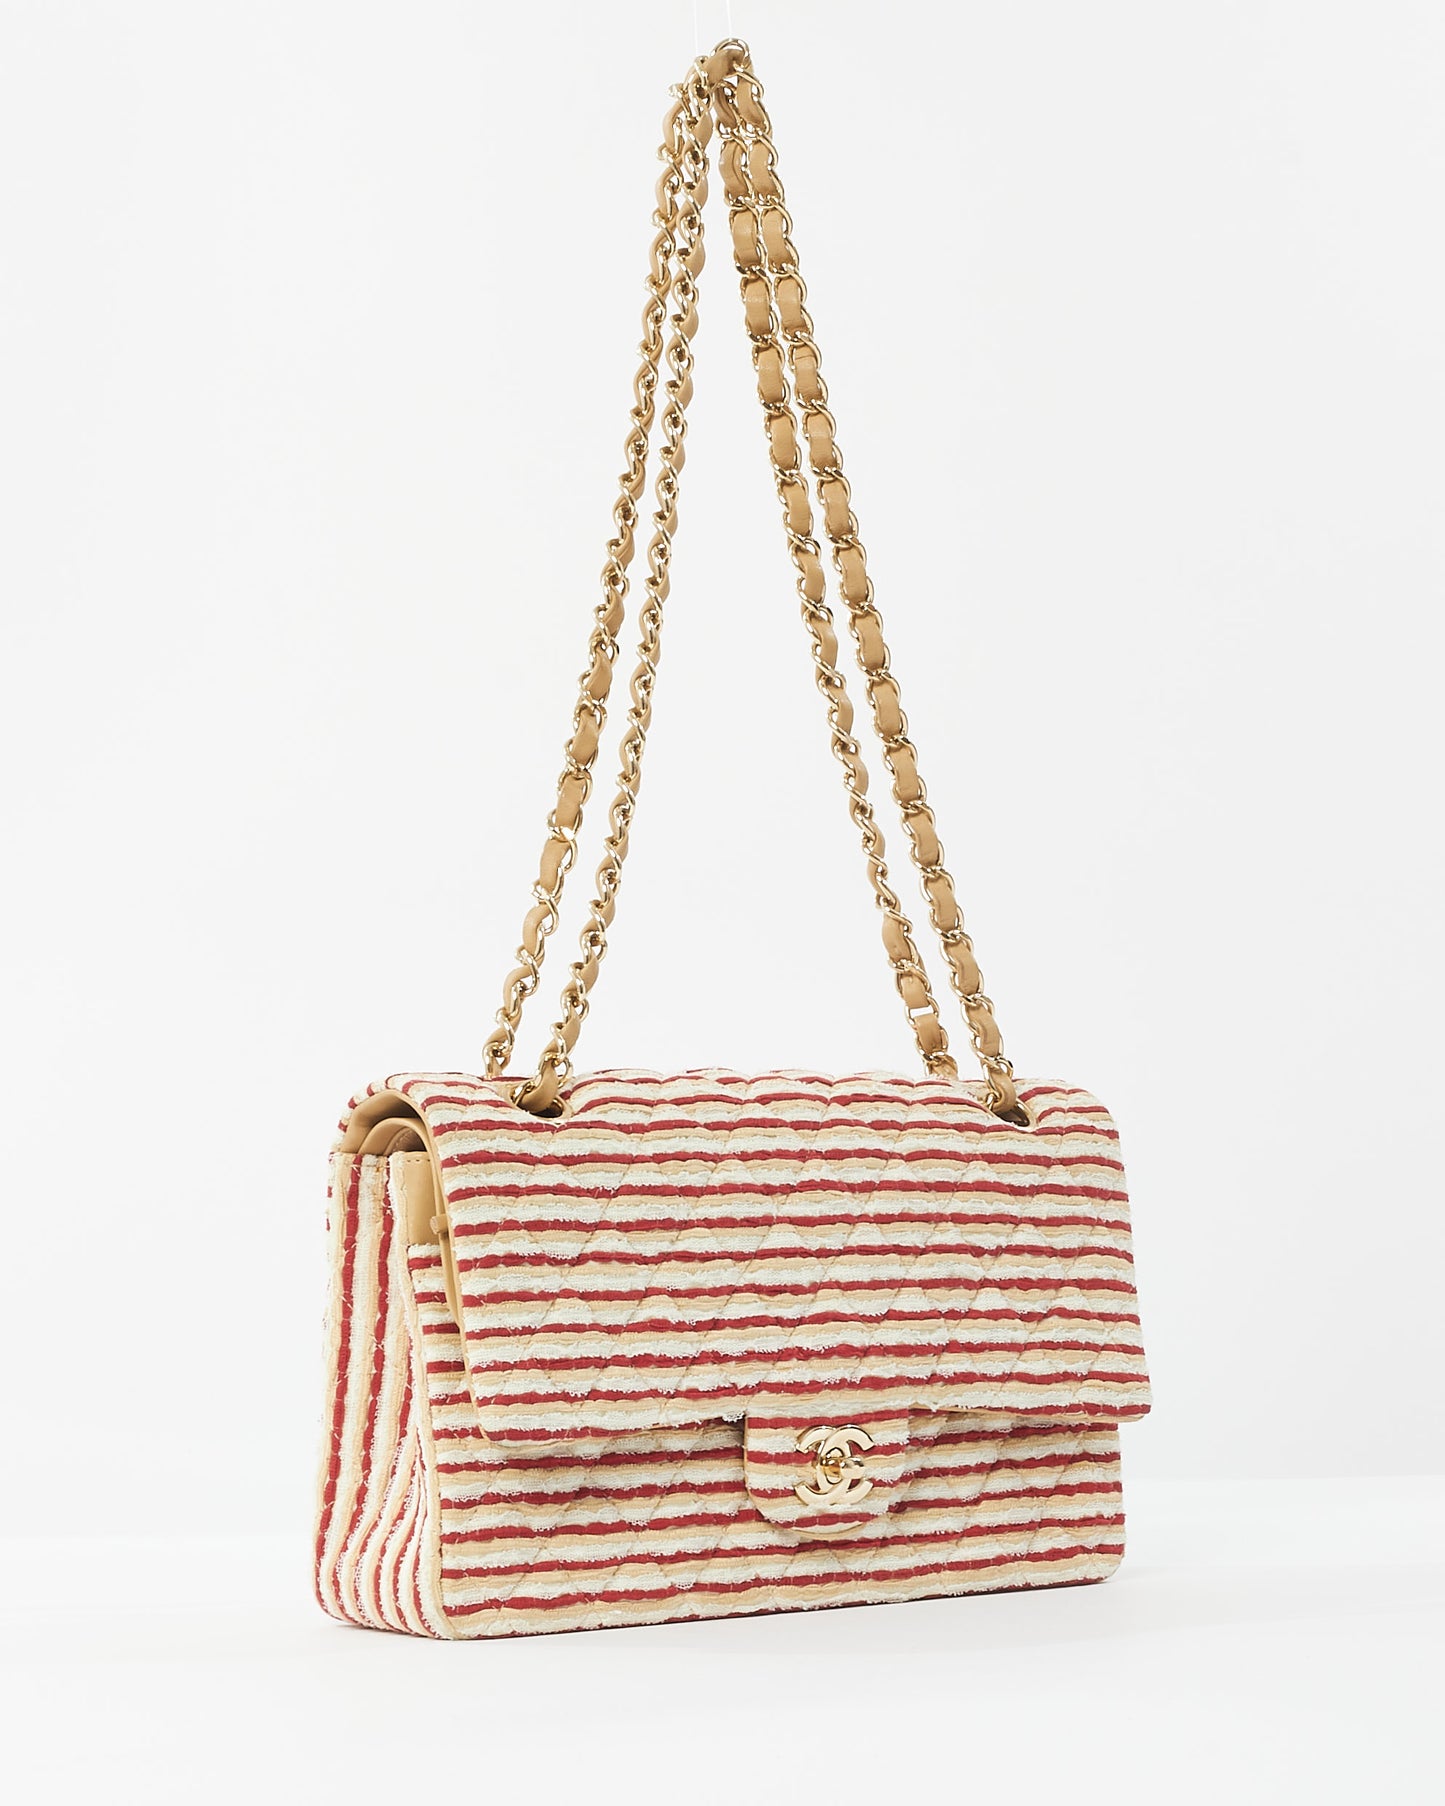 Chanel Red Beige & White Jersey Quilted Medium Coco Sailor Flap Bag